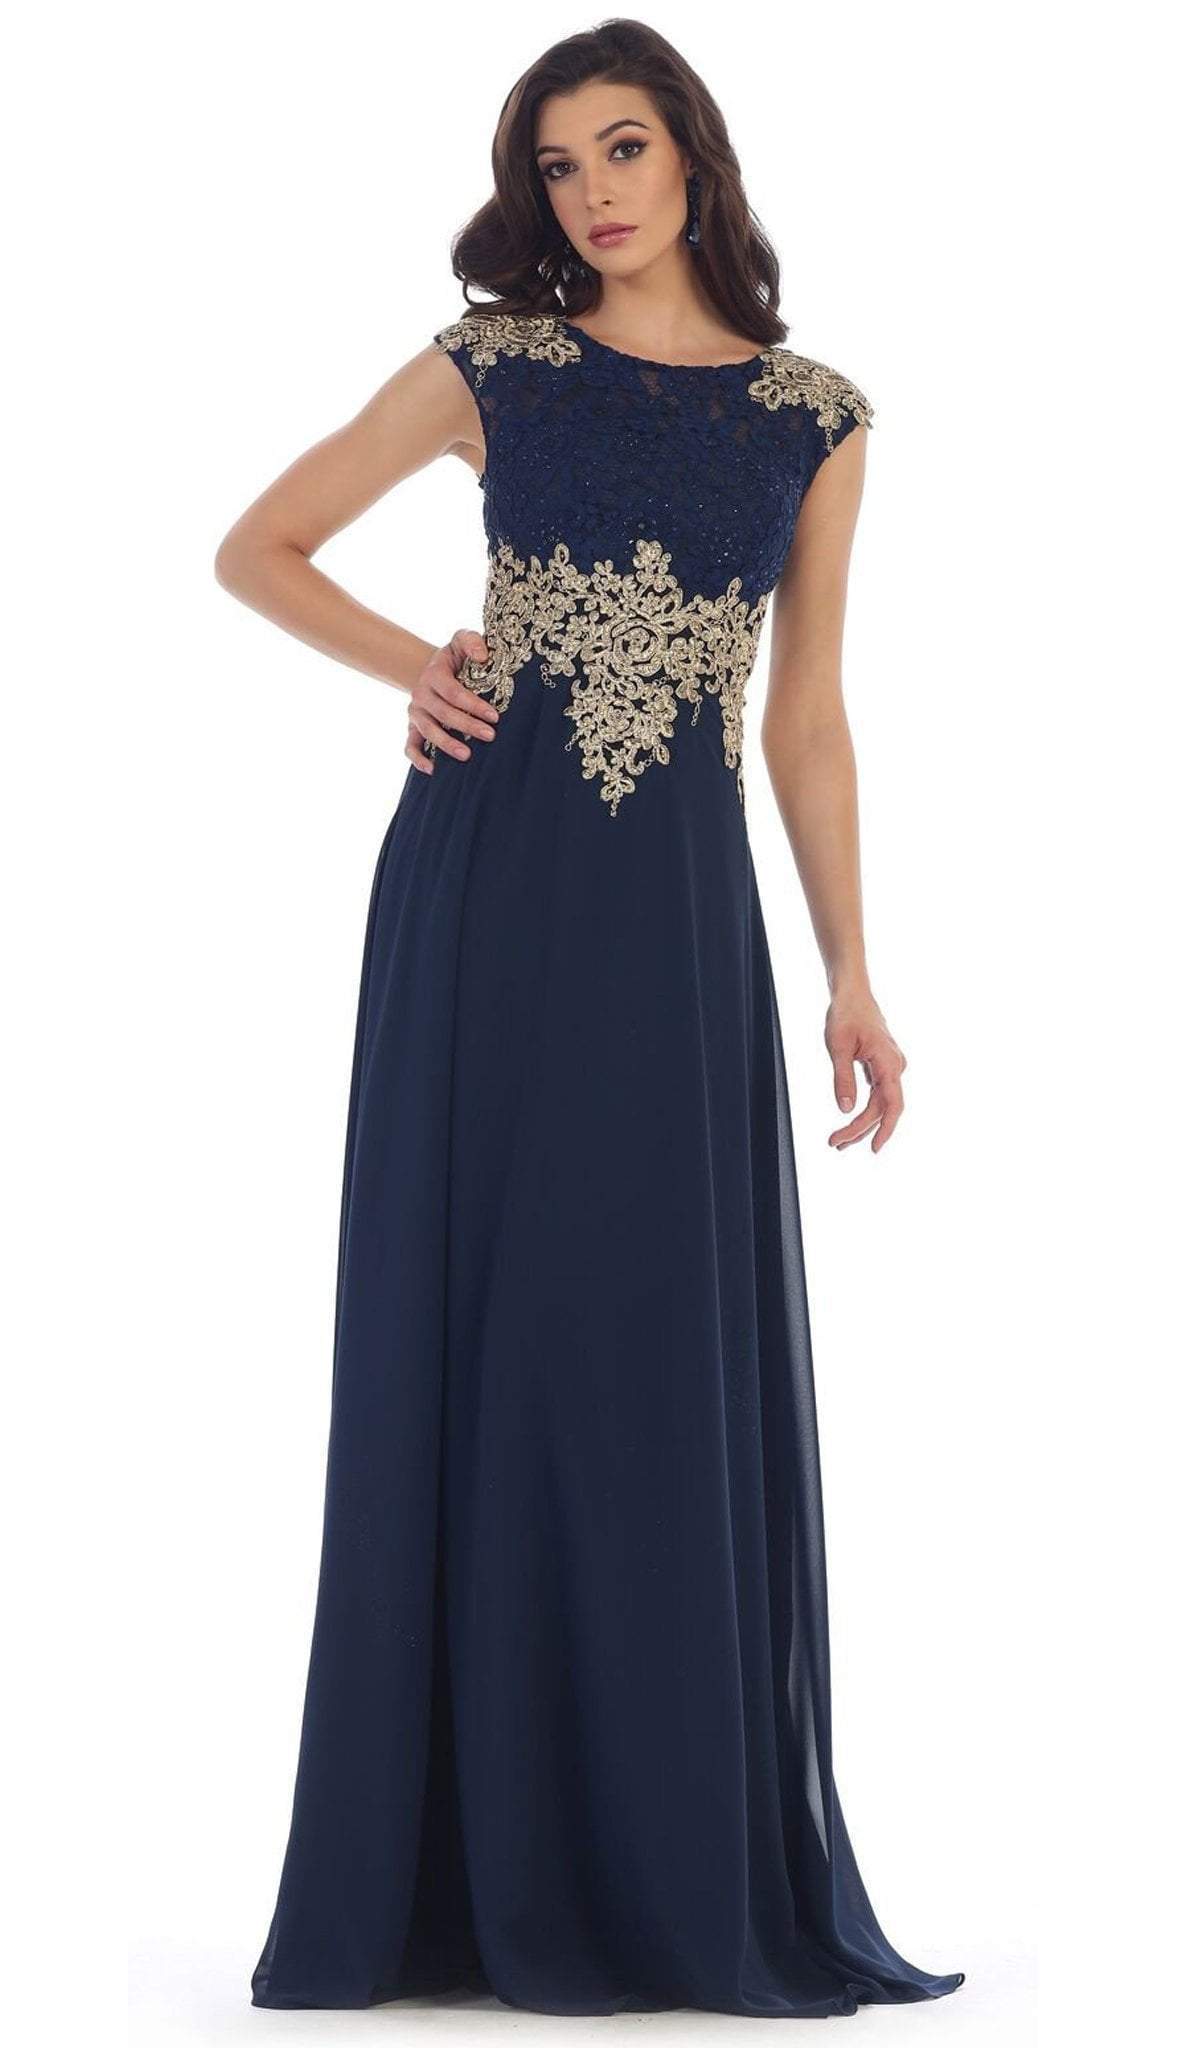 May Queen - Gilded Lace Illusion Bateau A-line Evening Dress Special Occasion Dress 4 / Navy